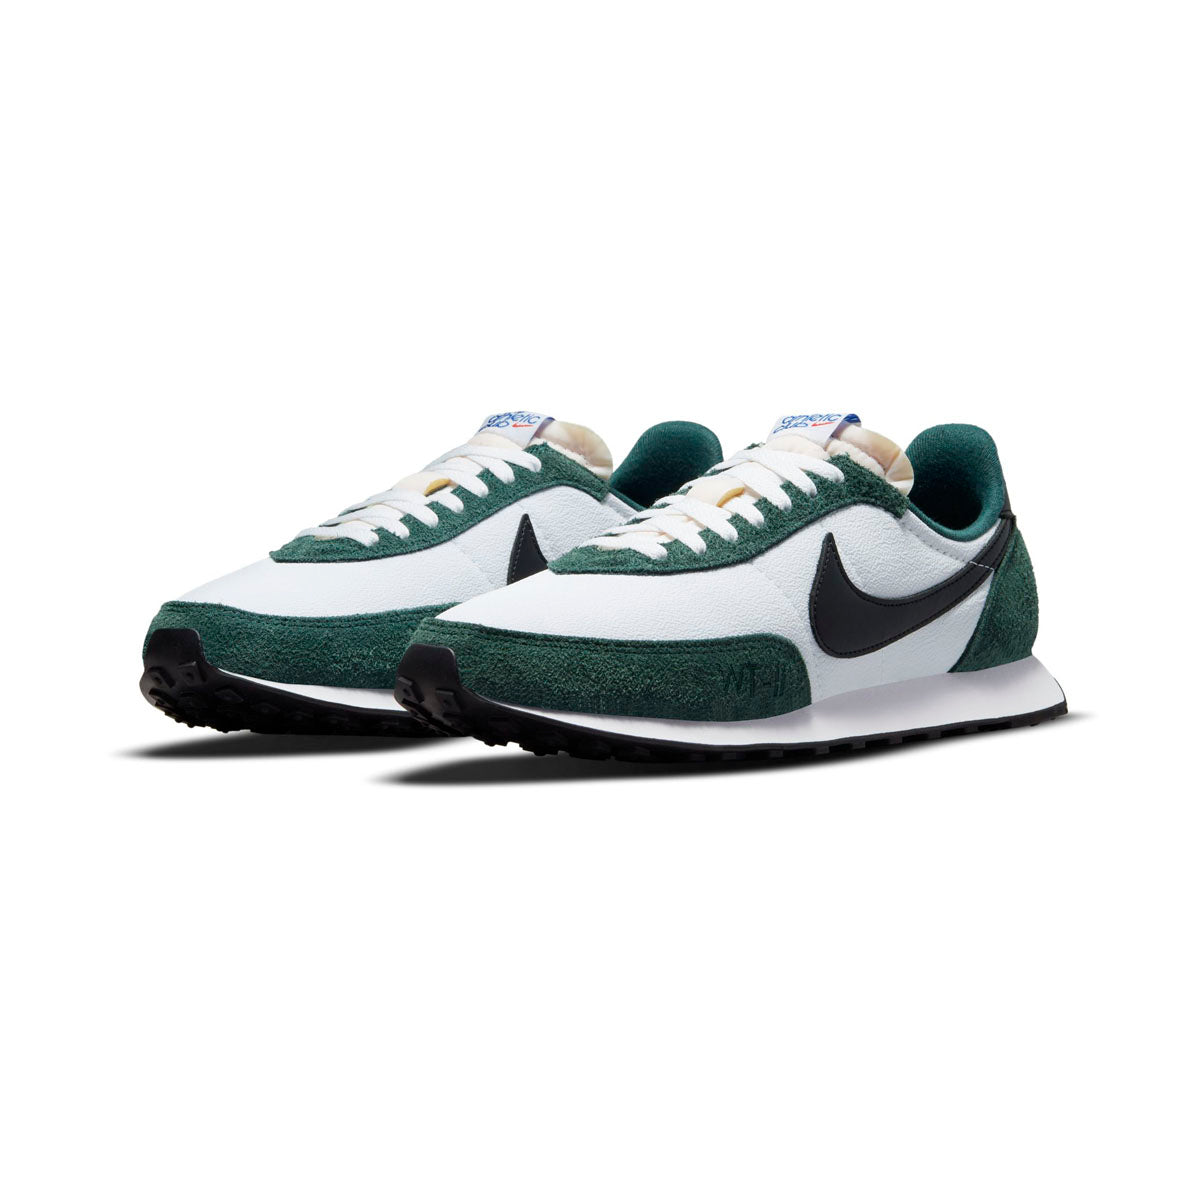 Nike Men's Waffle Trainer 2 Shoes